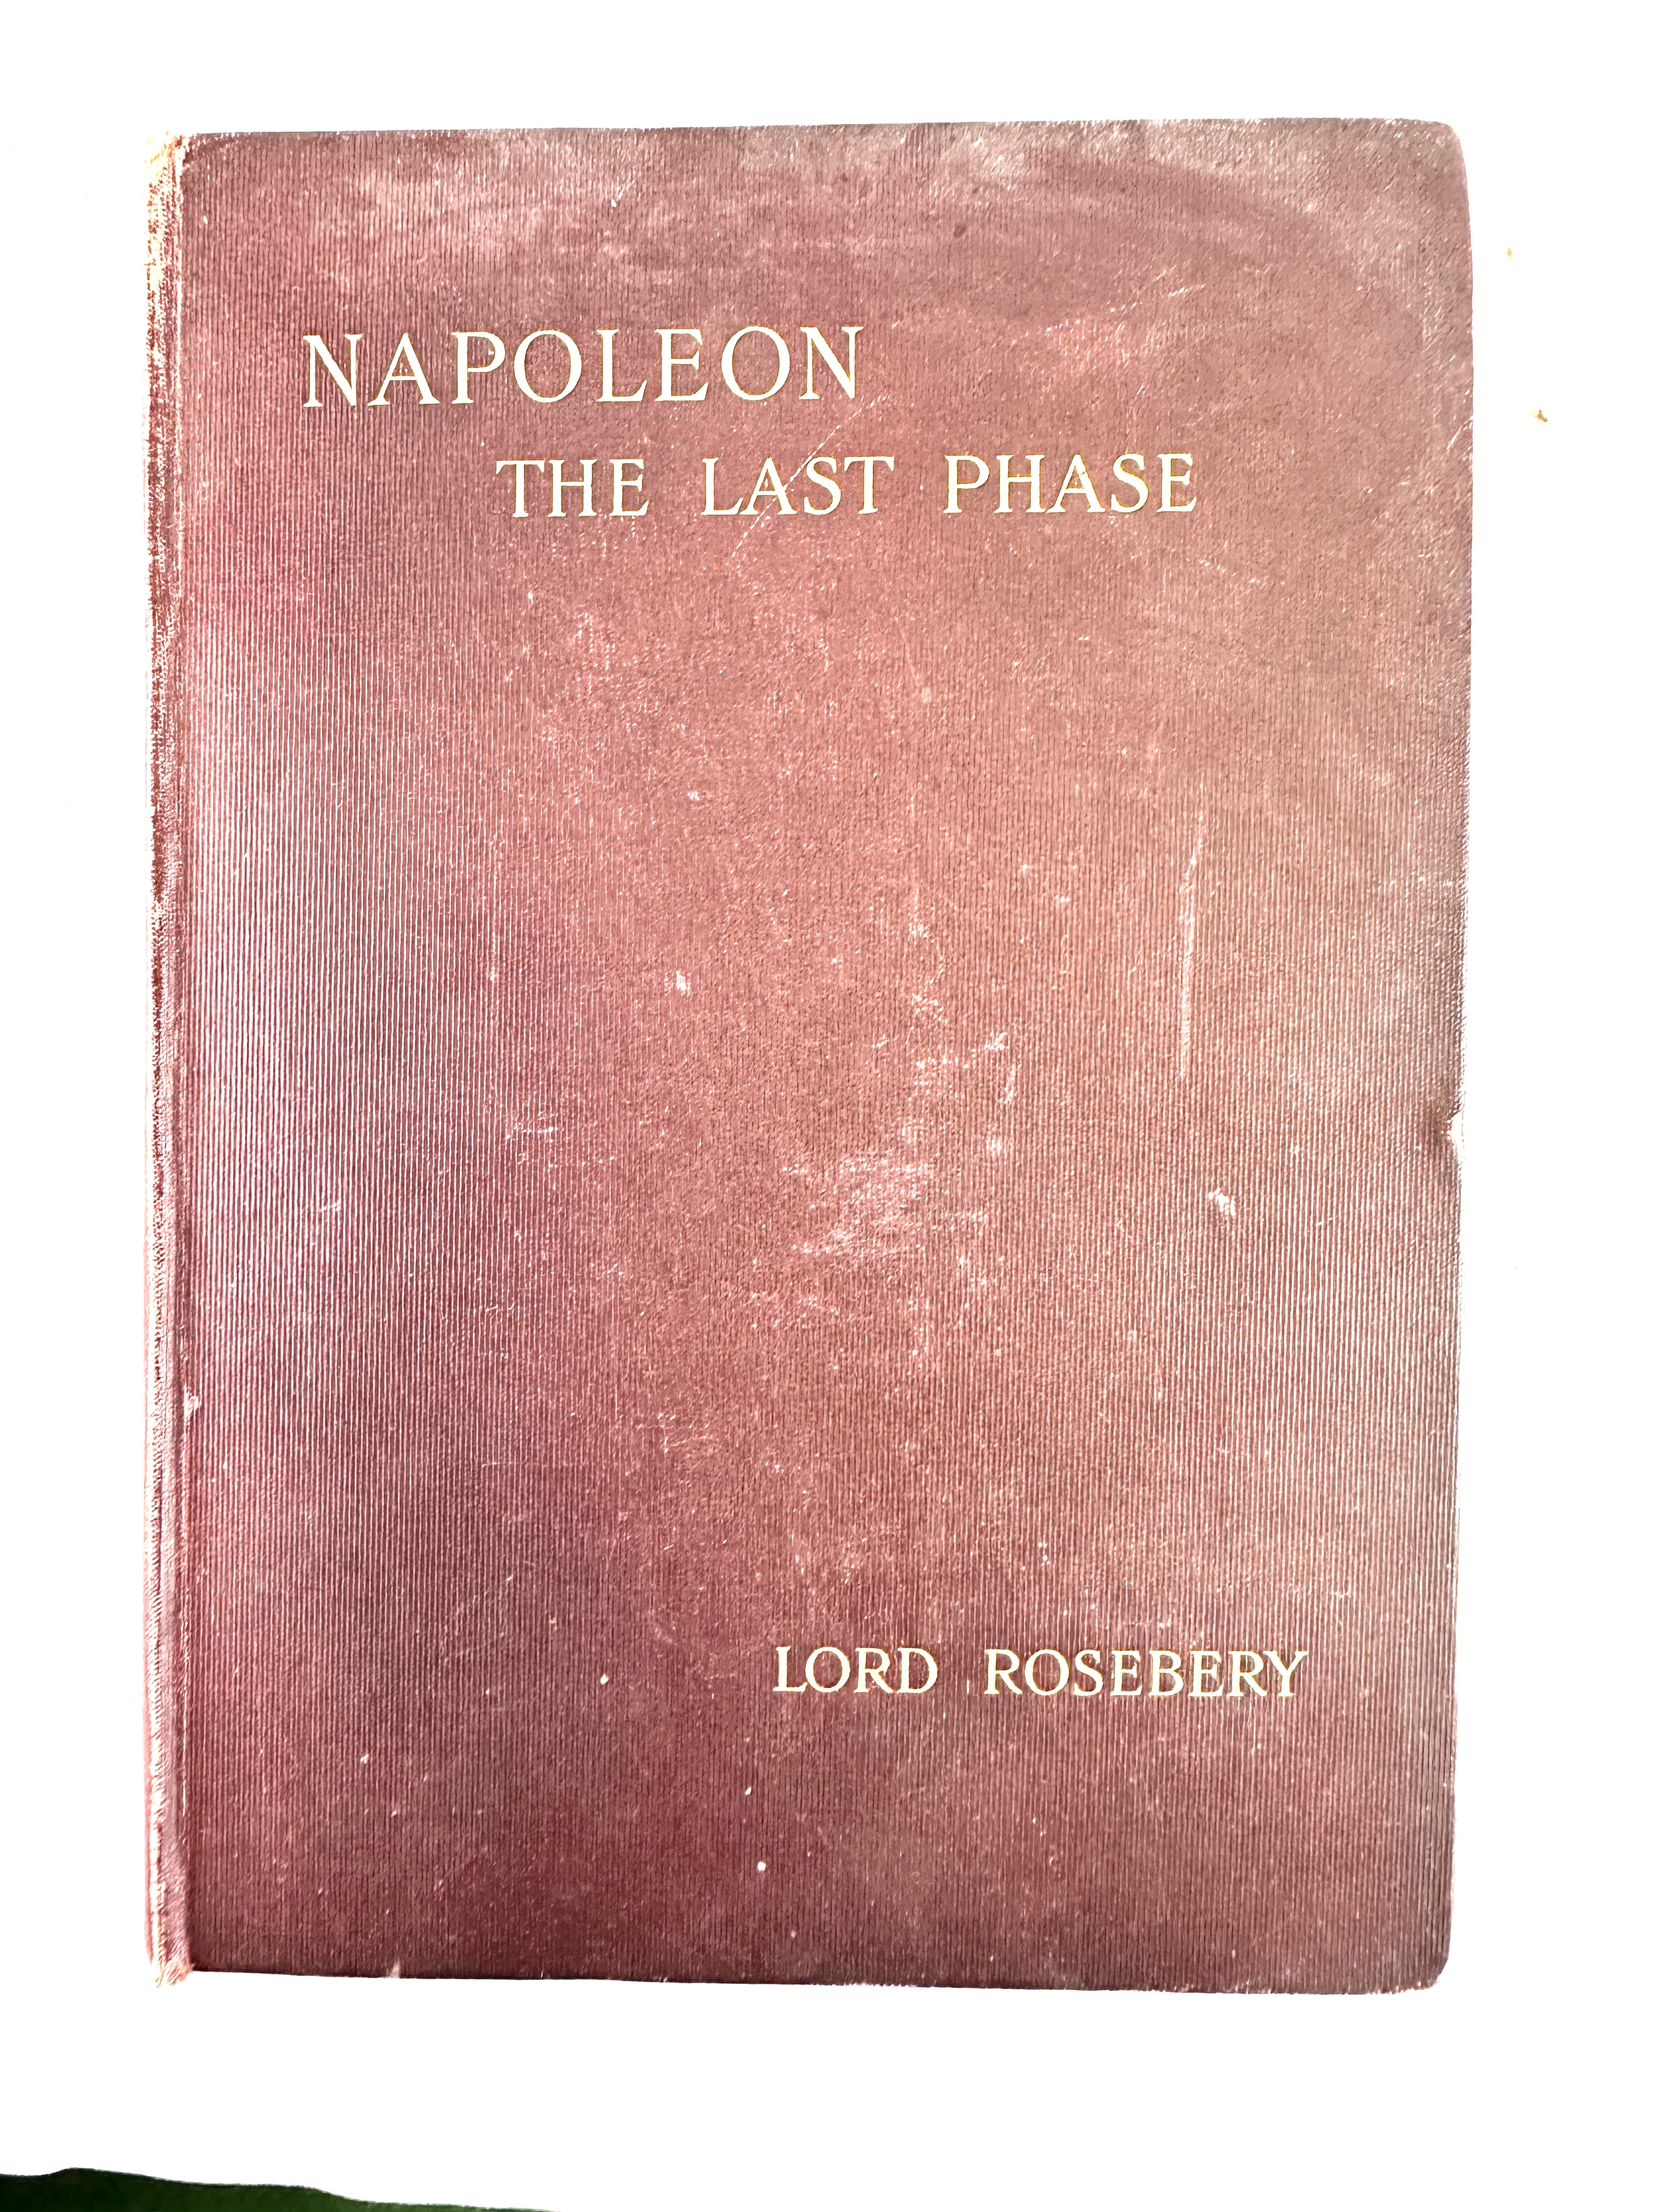 Napoleon The Last Phase by Lord Rosebery, 1900 and other books - Image 4 of 10